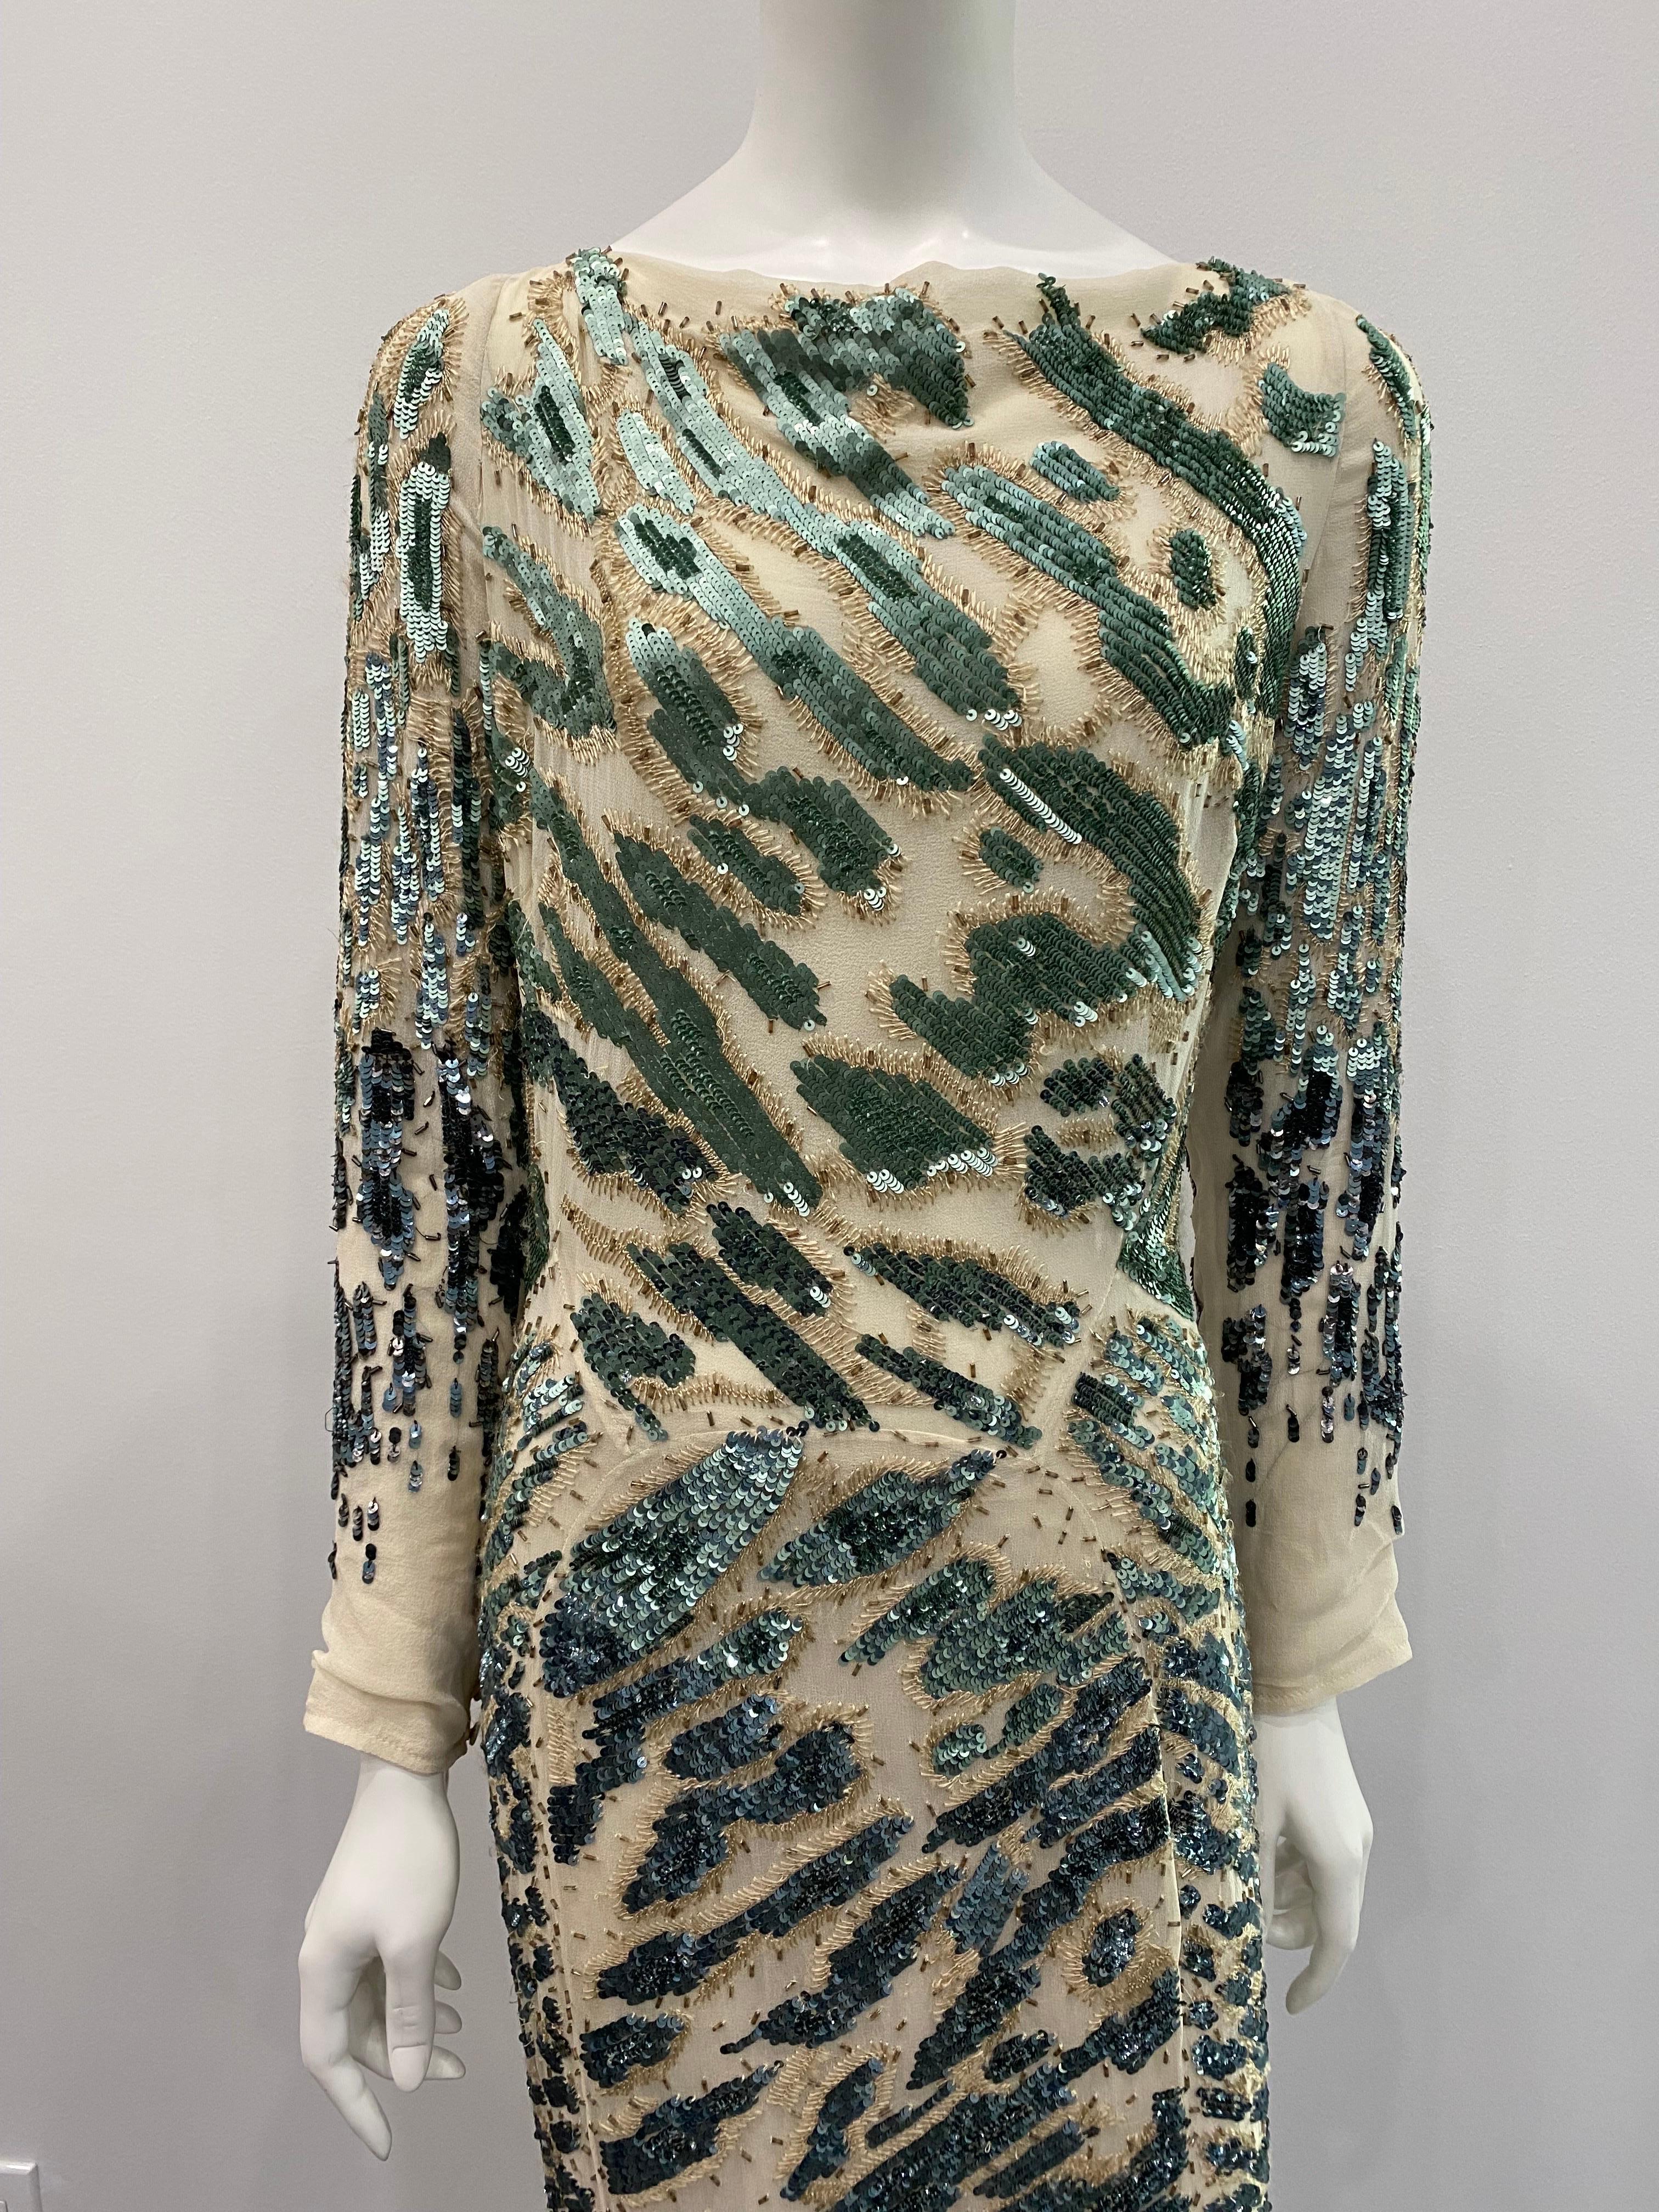 Roberto Cavalli Ivory and Green Sequin Chiffon Gown-Sz 44 In Good Condition For Sale In West Palm Beach, FL